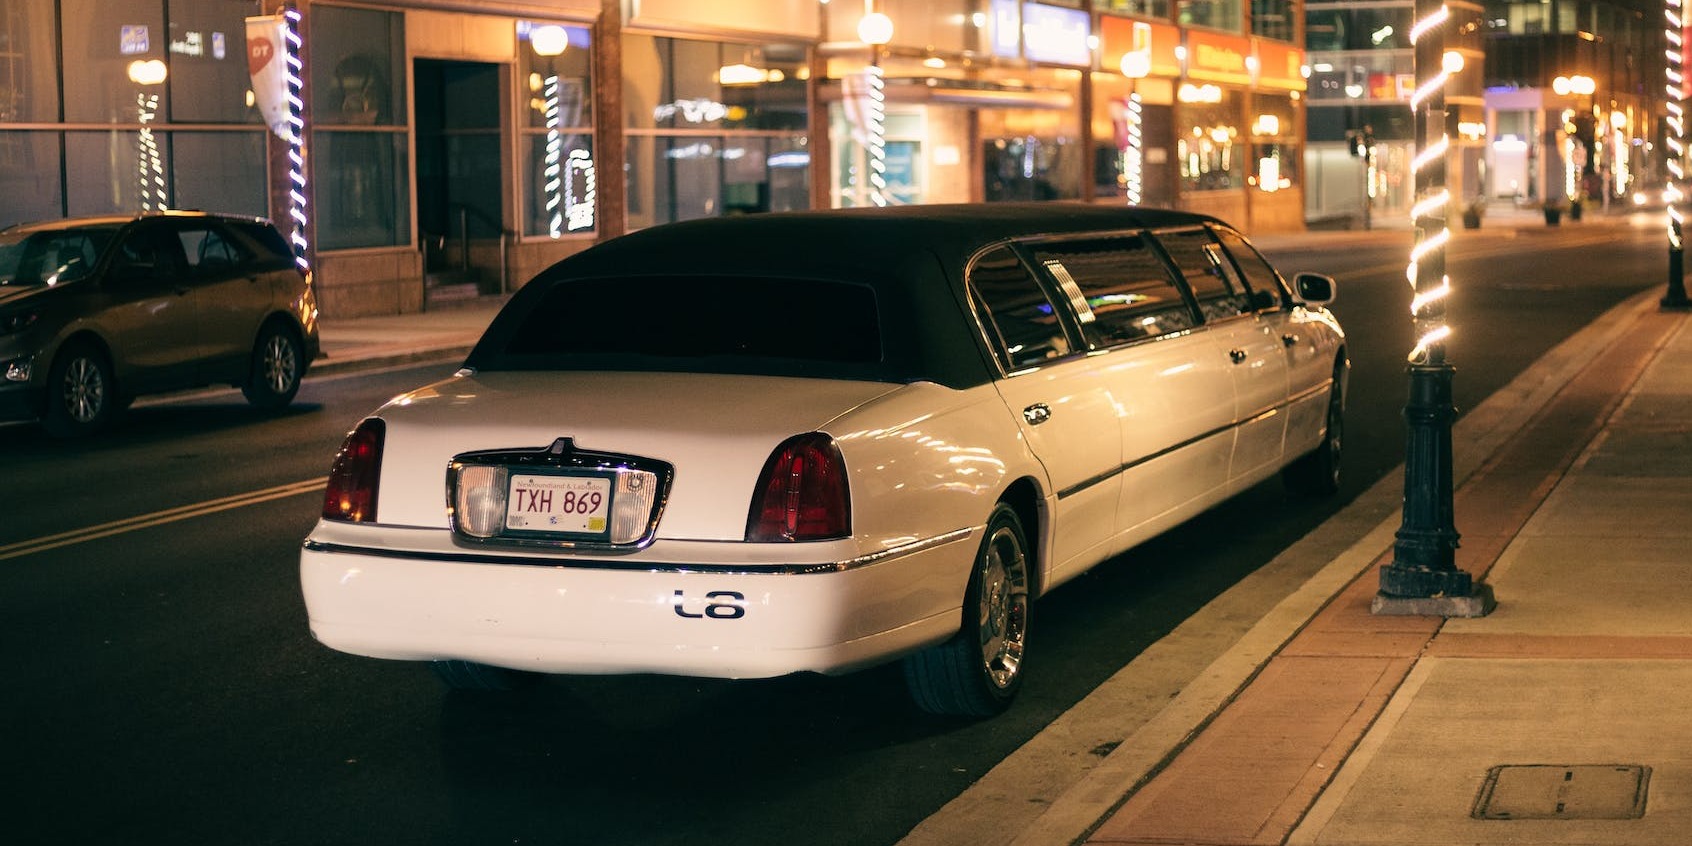 Top Tips for Hiring a Limo for Prom in the UK Without Breaking the Bank